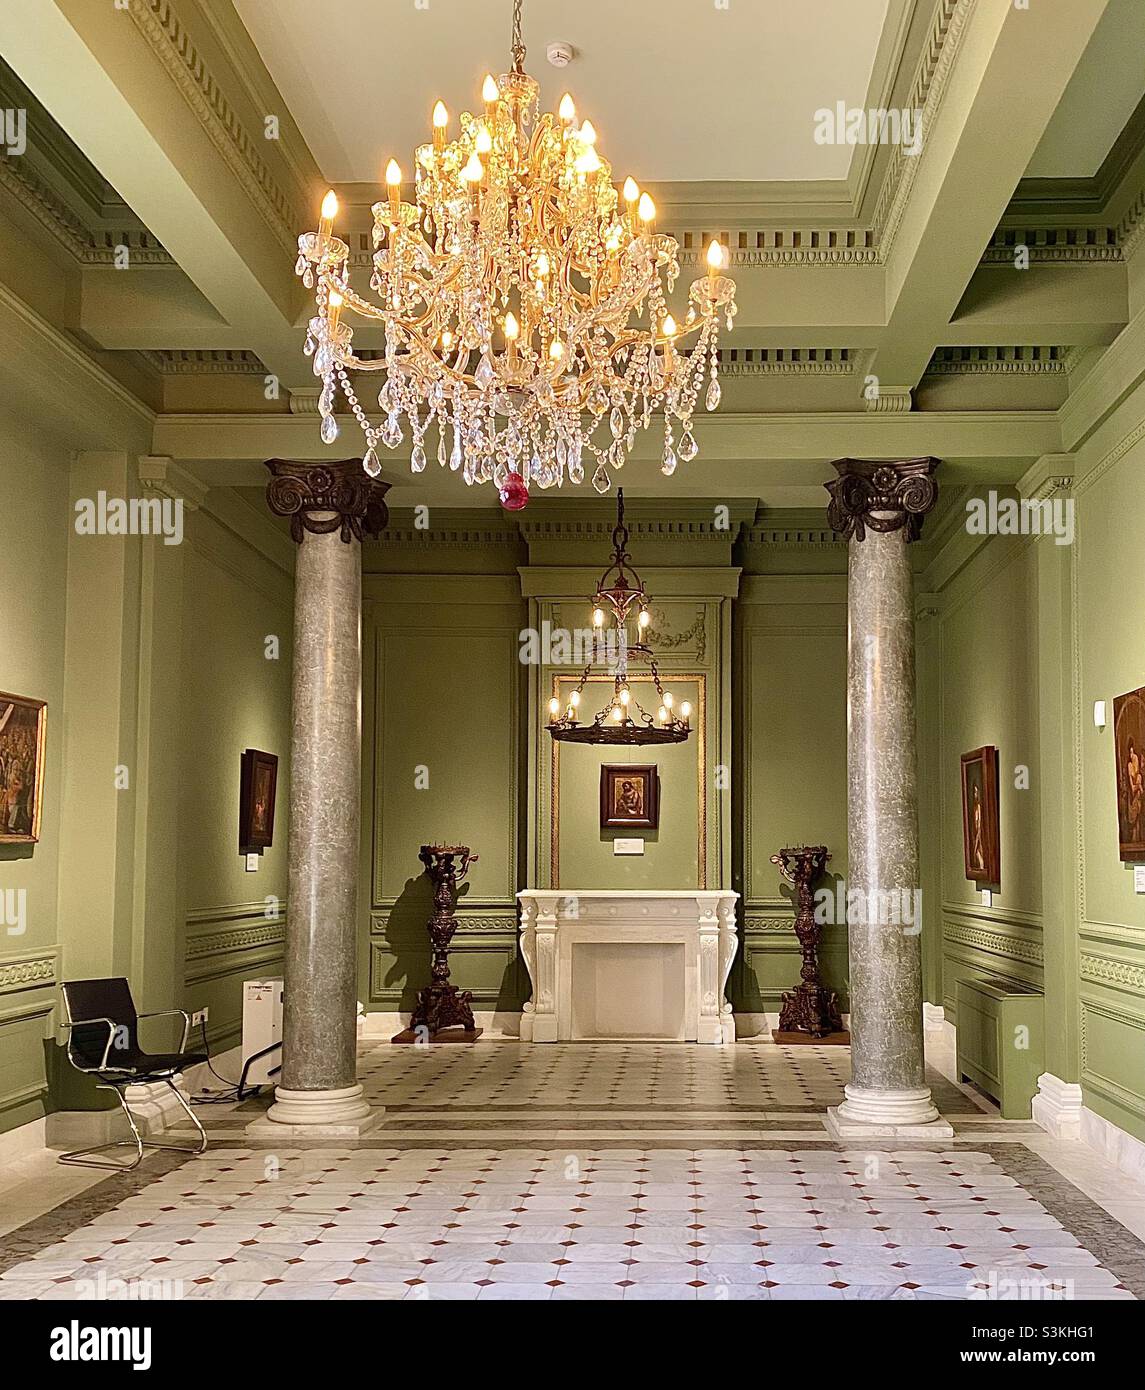 The former mansion in Athens, Greece, from 1882-1921, of Ernst Ziller, celebrated architect of Athens, and later of Loverdos, the banker. Restored and re-opened, it is decorative and beautiful inside. Stock Photo